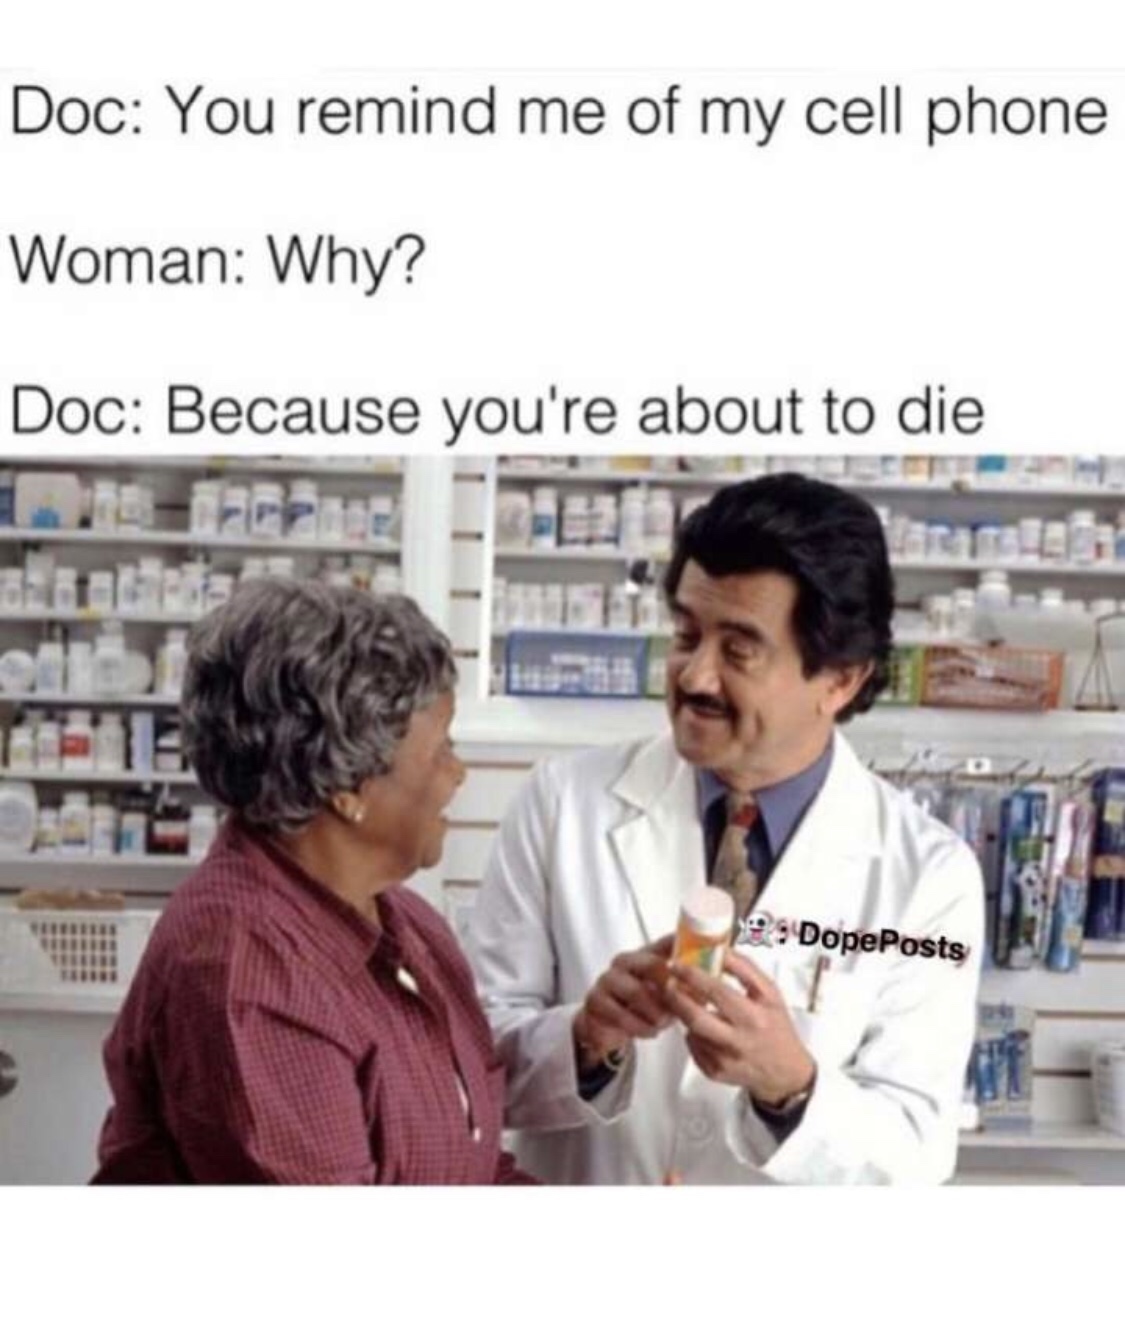 person at a pharmacy - Doc You remind me of my cell phone Woman Why? Doc Because you're about to die 9 Dope Posts